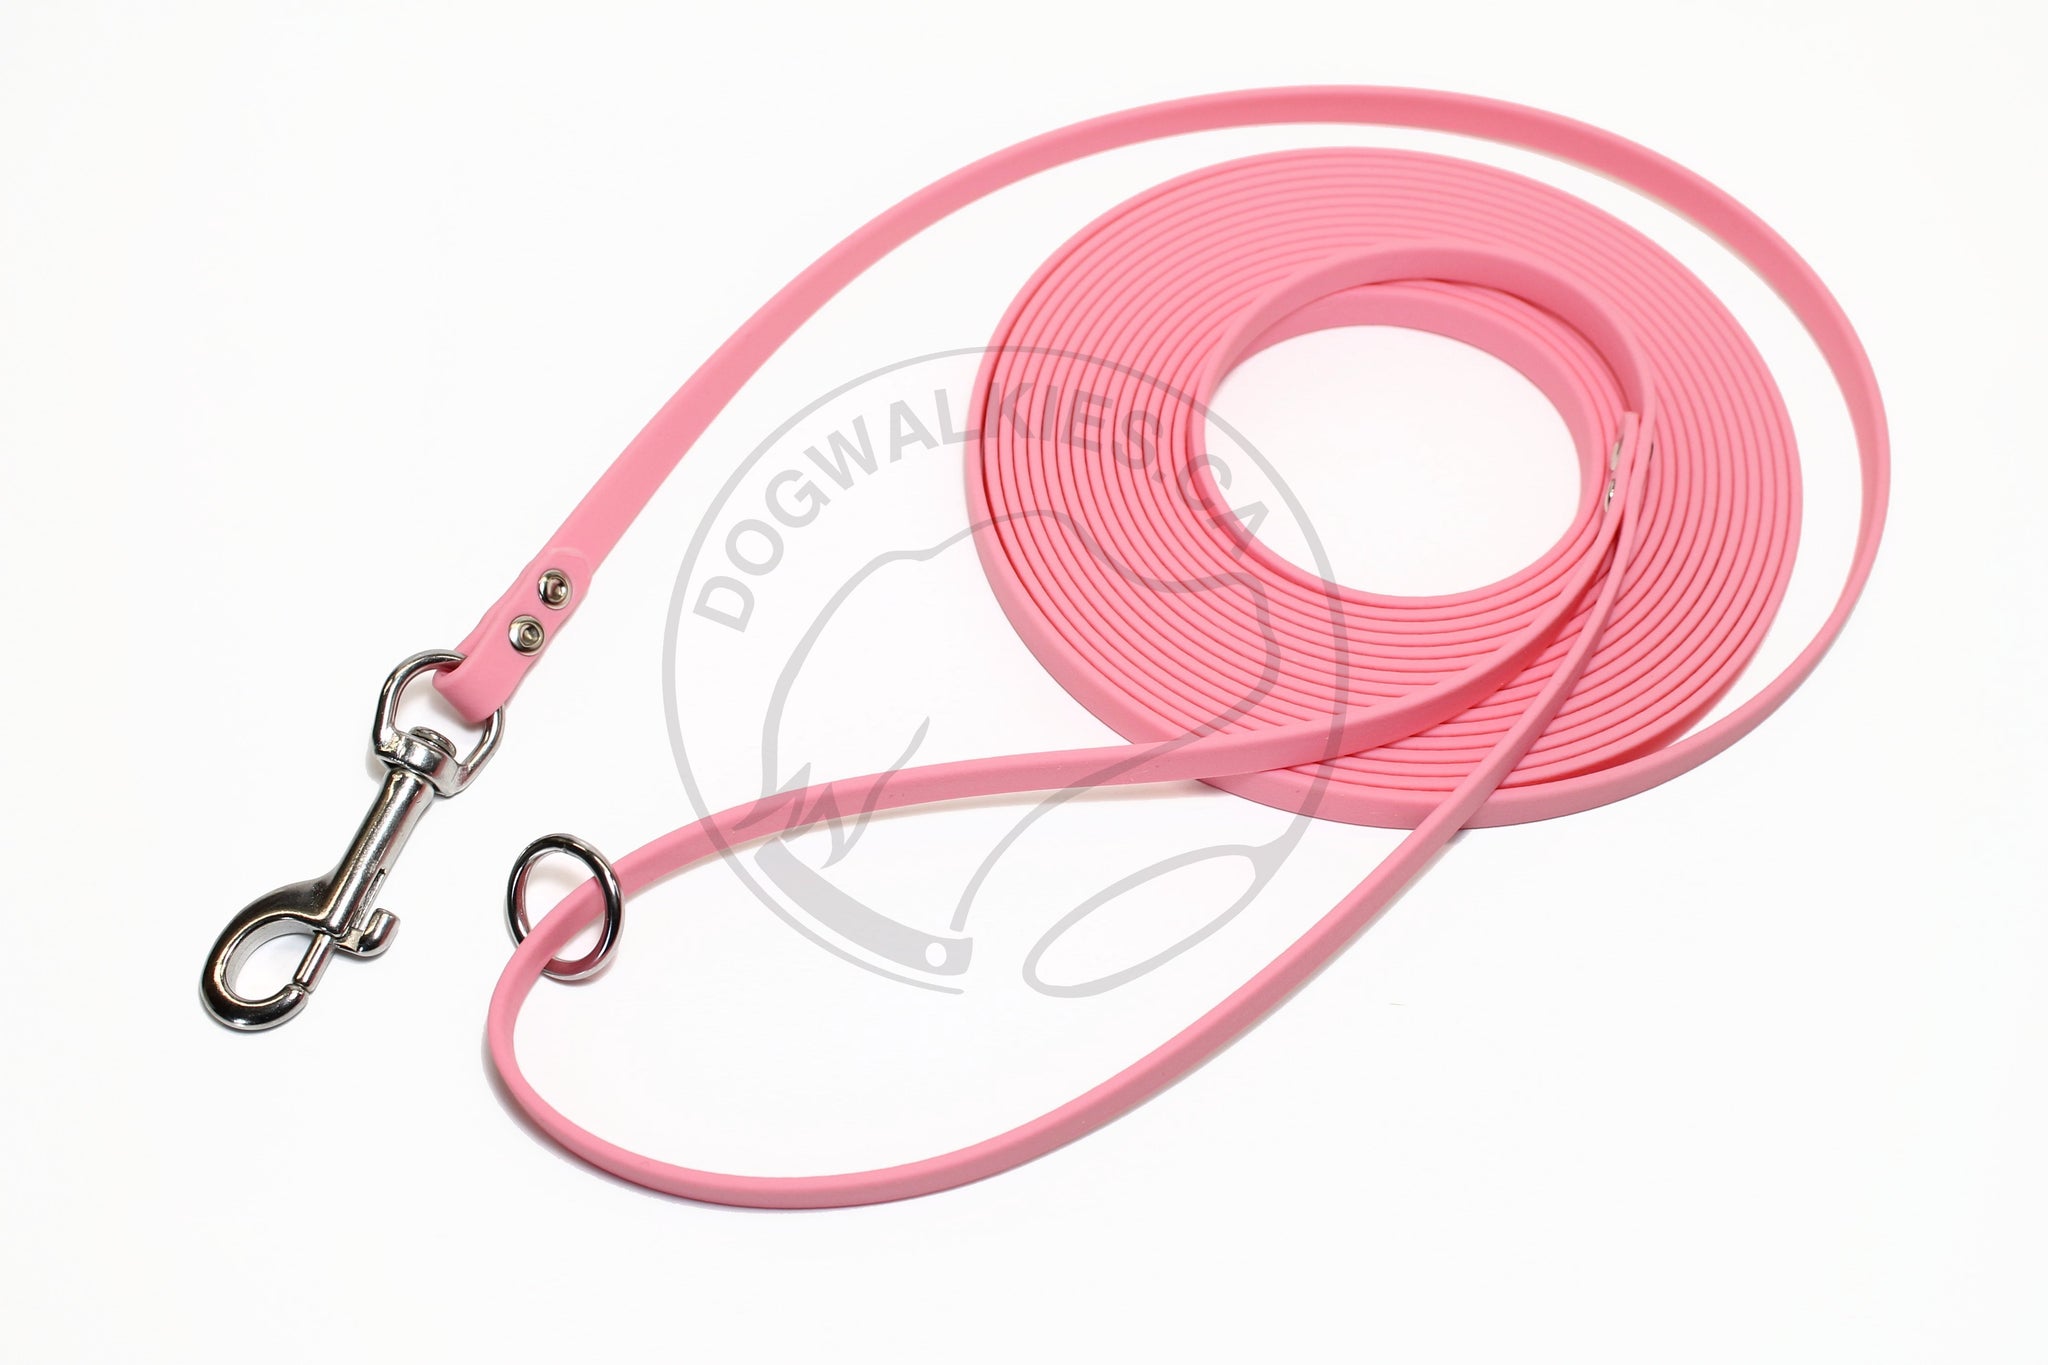 Lighter Weight Waterproof Tracking Recall Long Line - leash for cats - 3/8" (9mm) Biothane